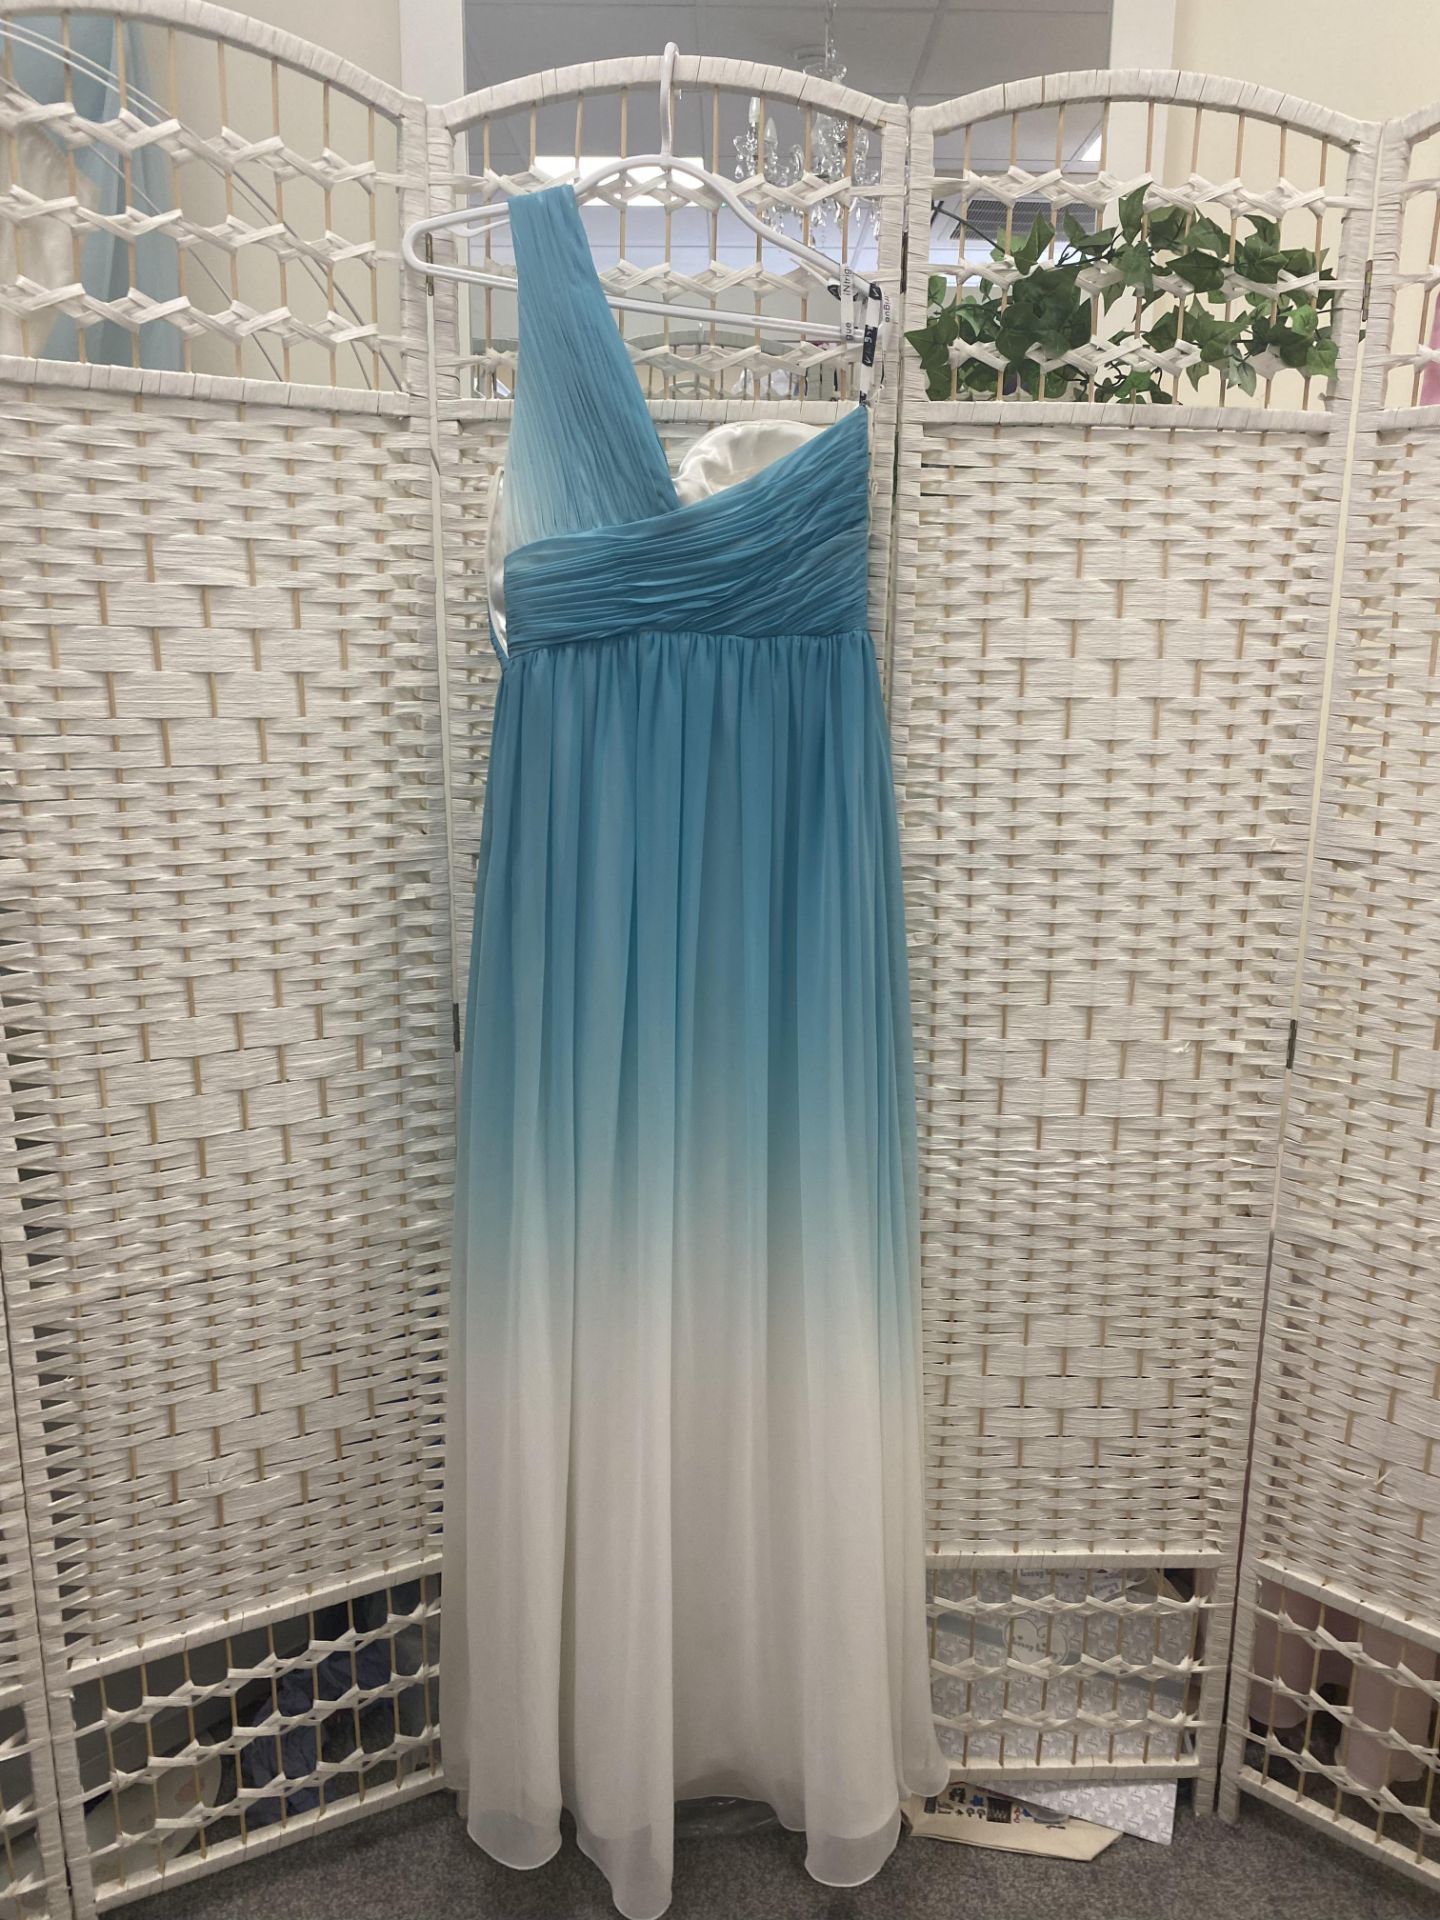 Alexia Designs Blue and White Ombre Prom Dress Size 6 - Image 6 of 7